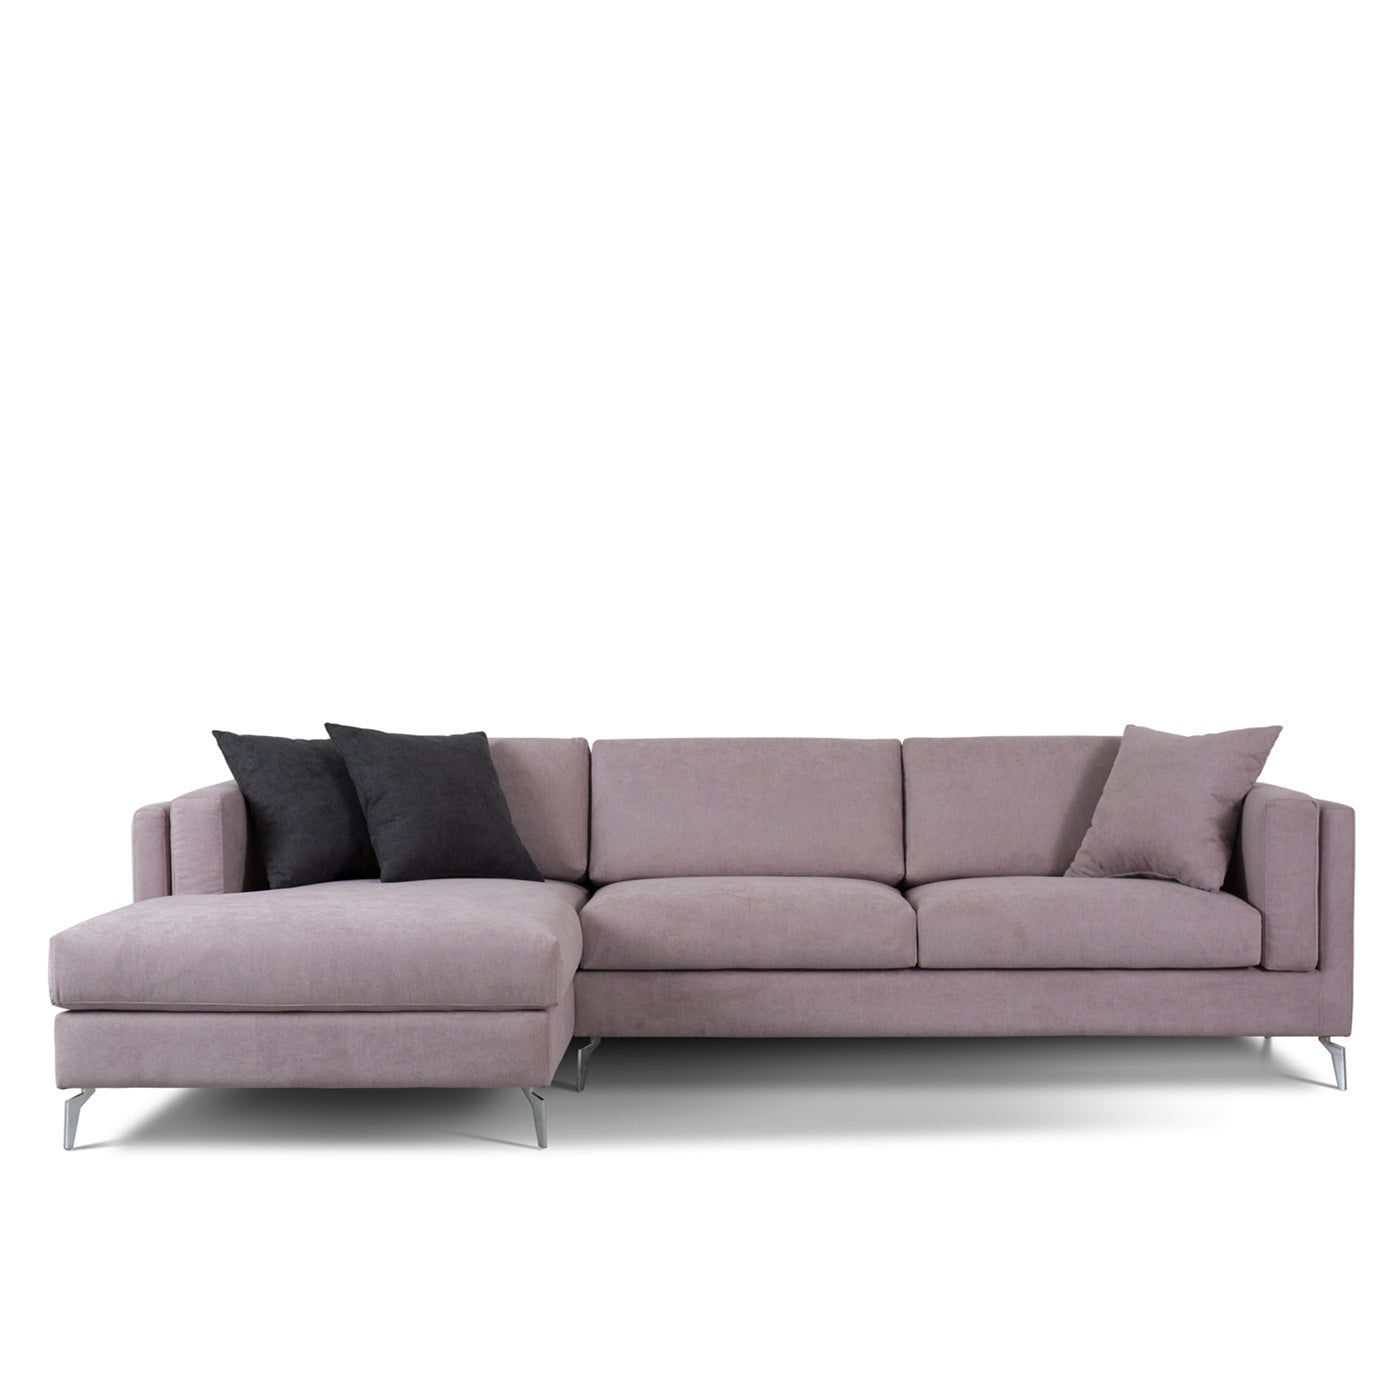 Giotto L-Shaped Pink Sofa - Alternative view 3